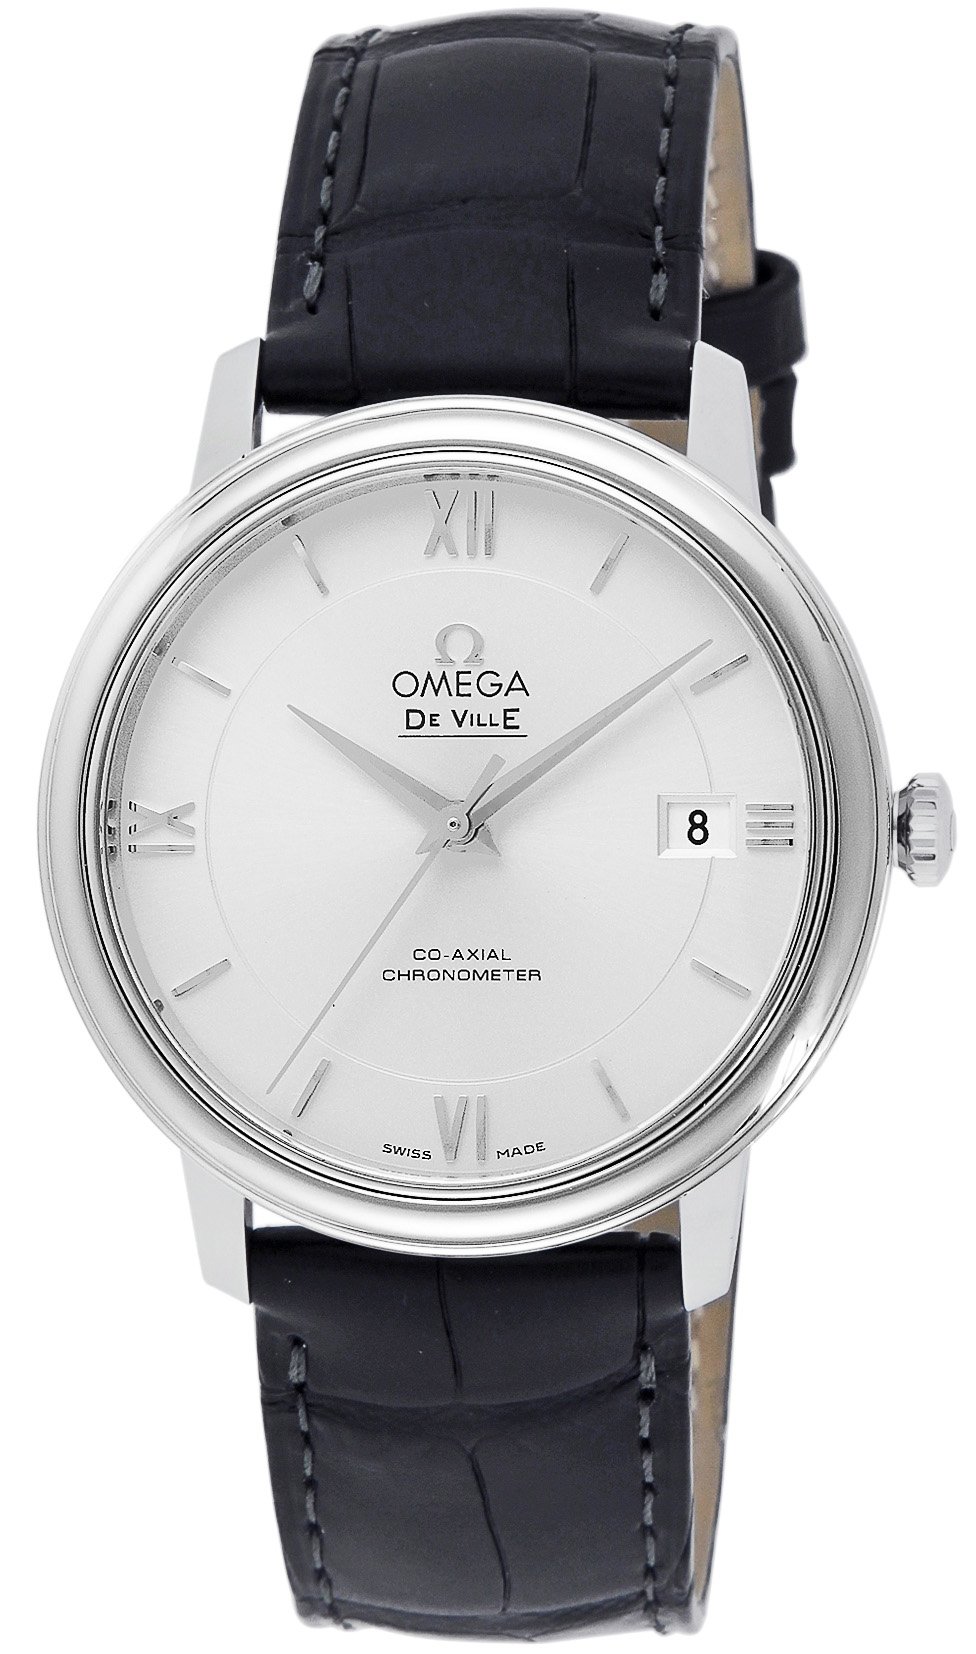 Omega DeVille 424.13.40.20.02.001 Stainless Steel Automatic Men's Watch